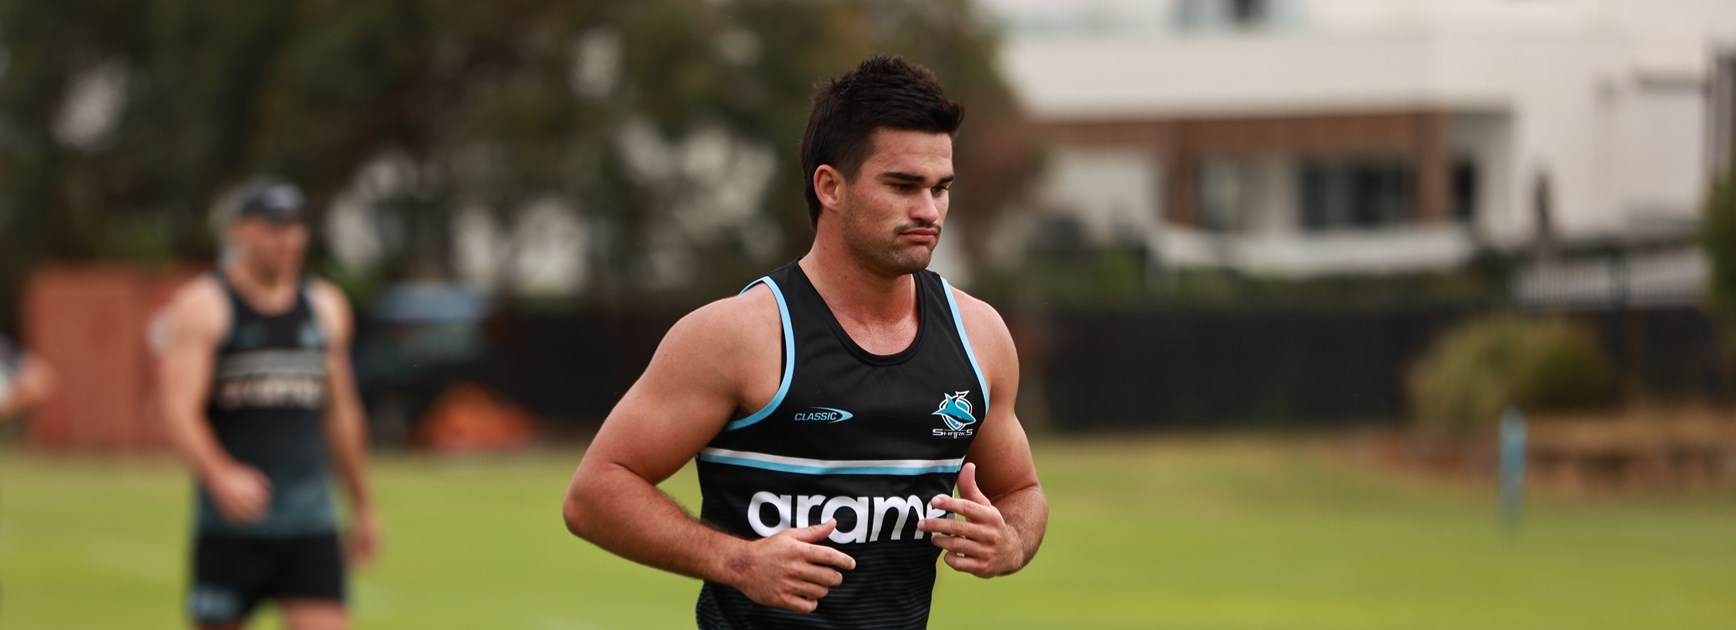 Atkinson draws inspiration from Hynes as he chases NRL dream